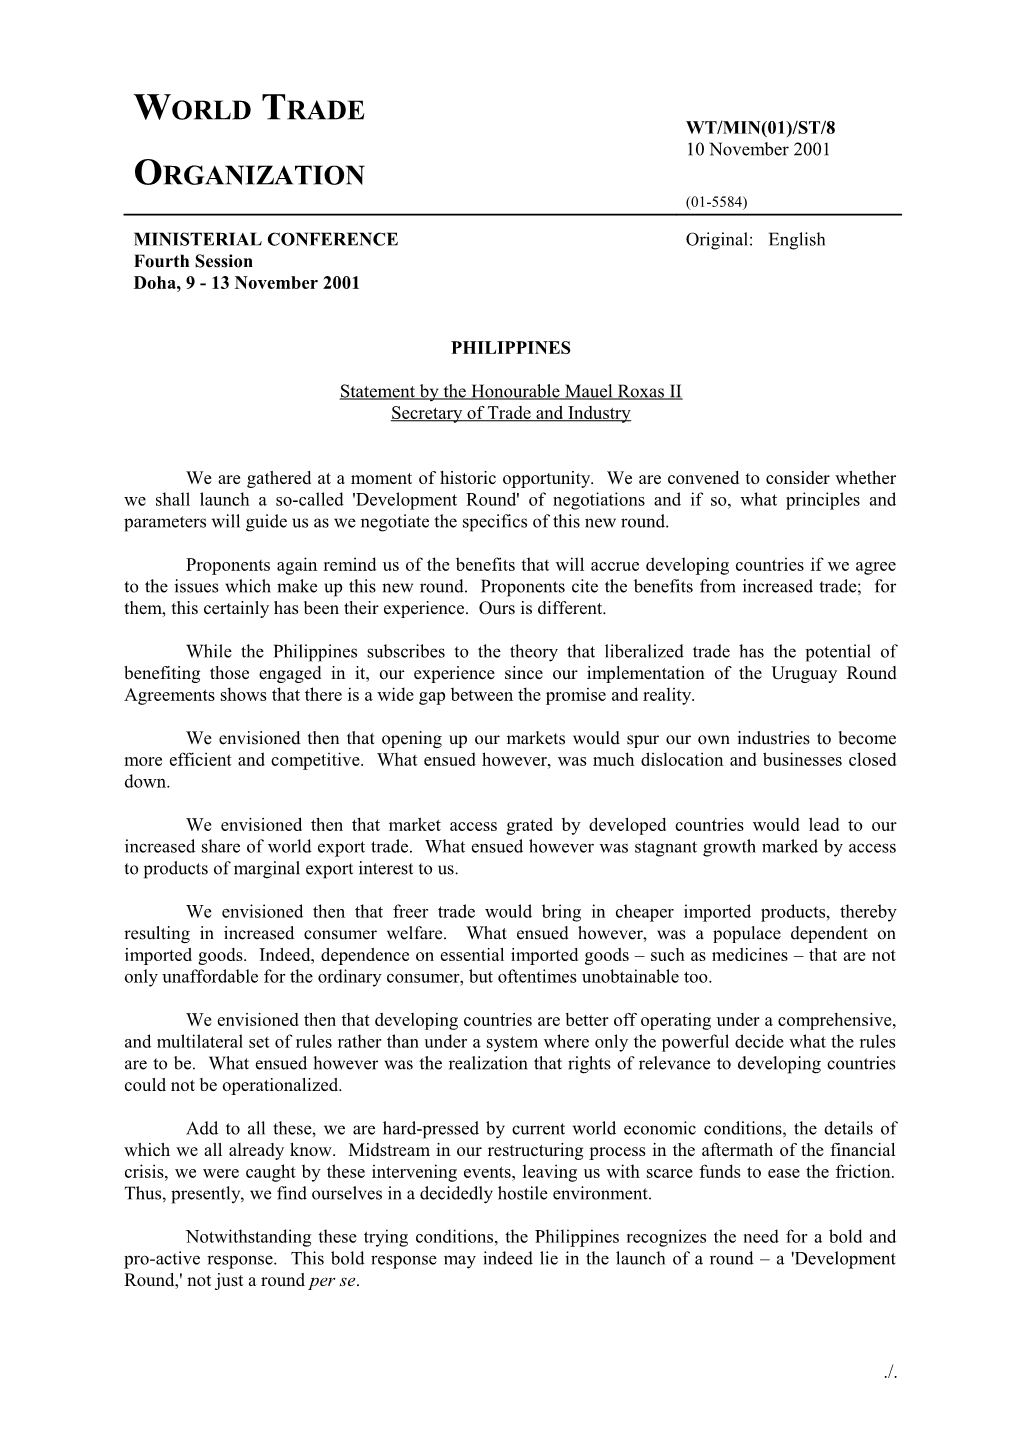 Statement by the Honourable Mauel Roxas II